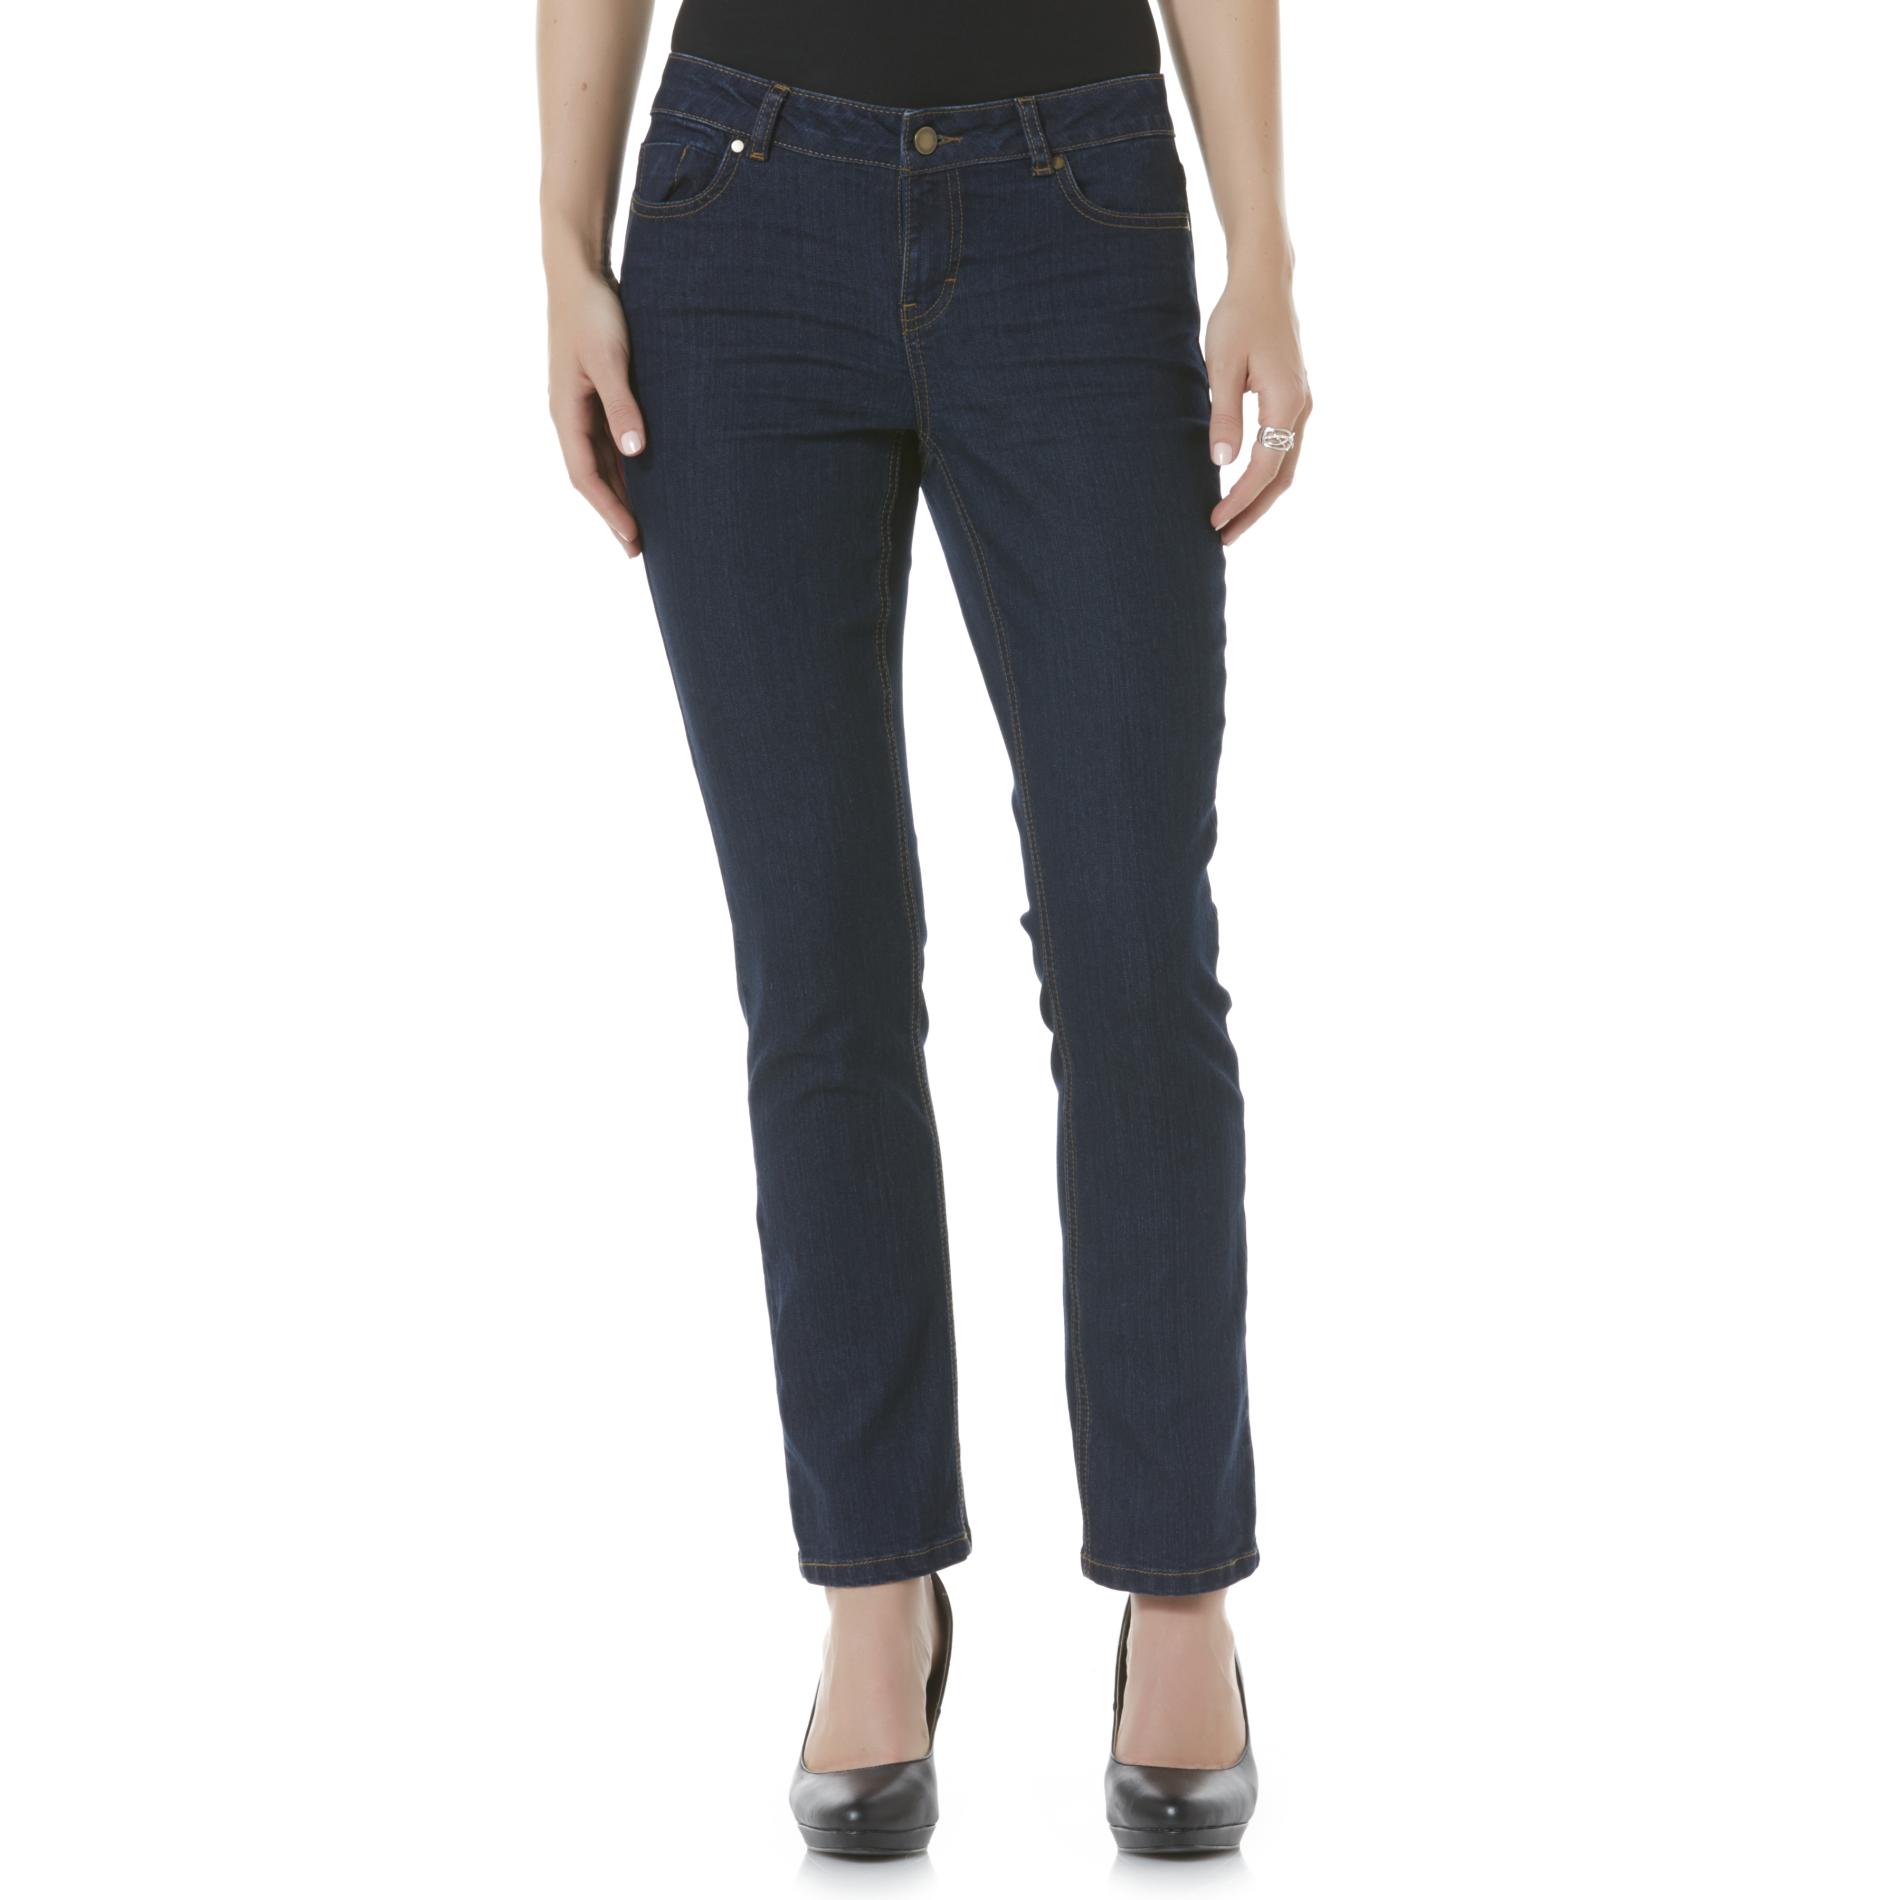 Attention Women's Contemporary Fit Jeans | Shop Your Way: Online ...